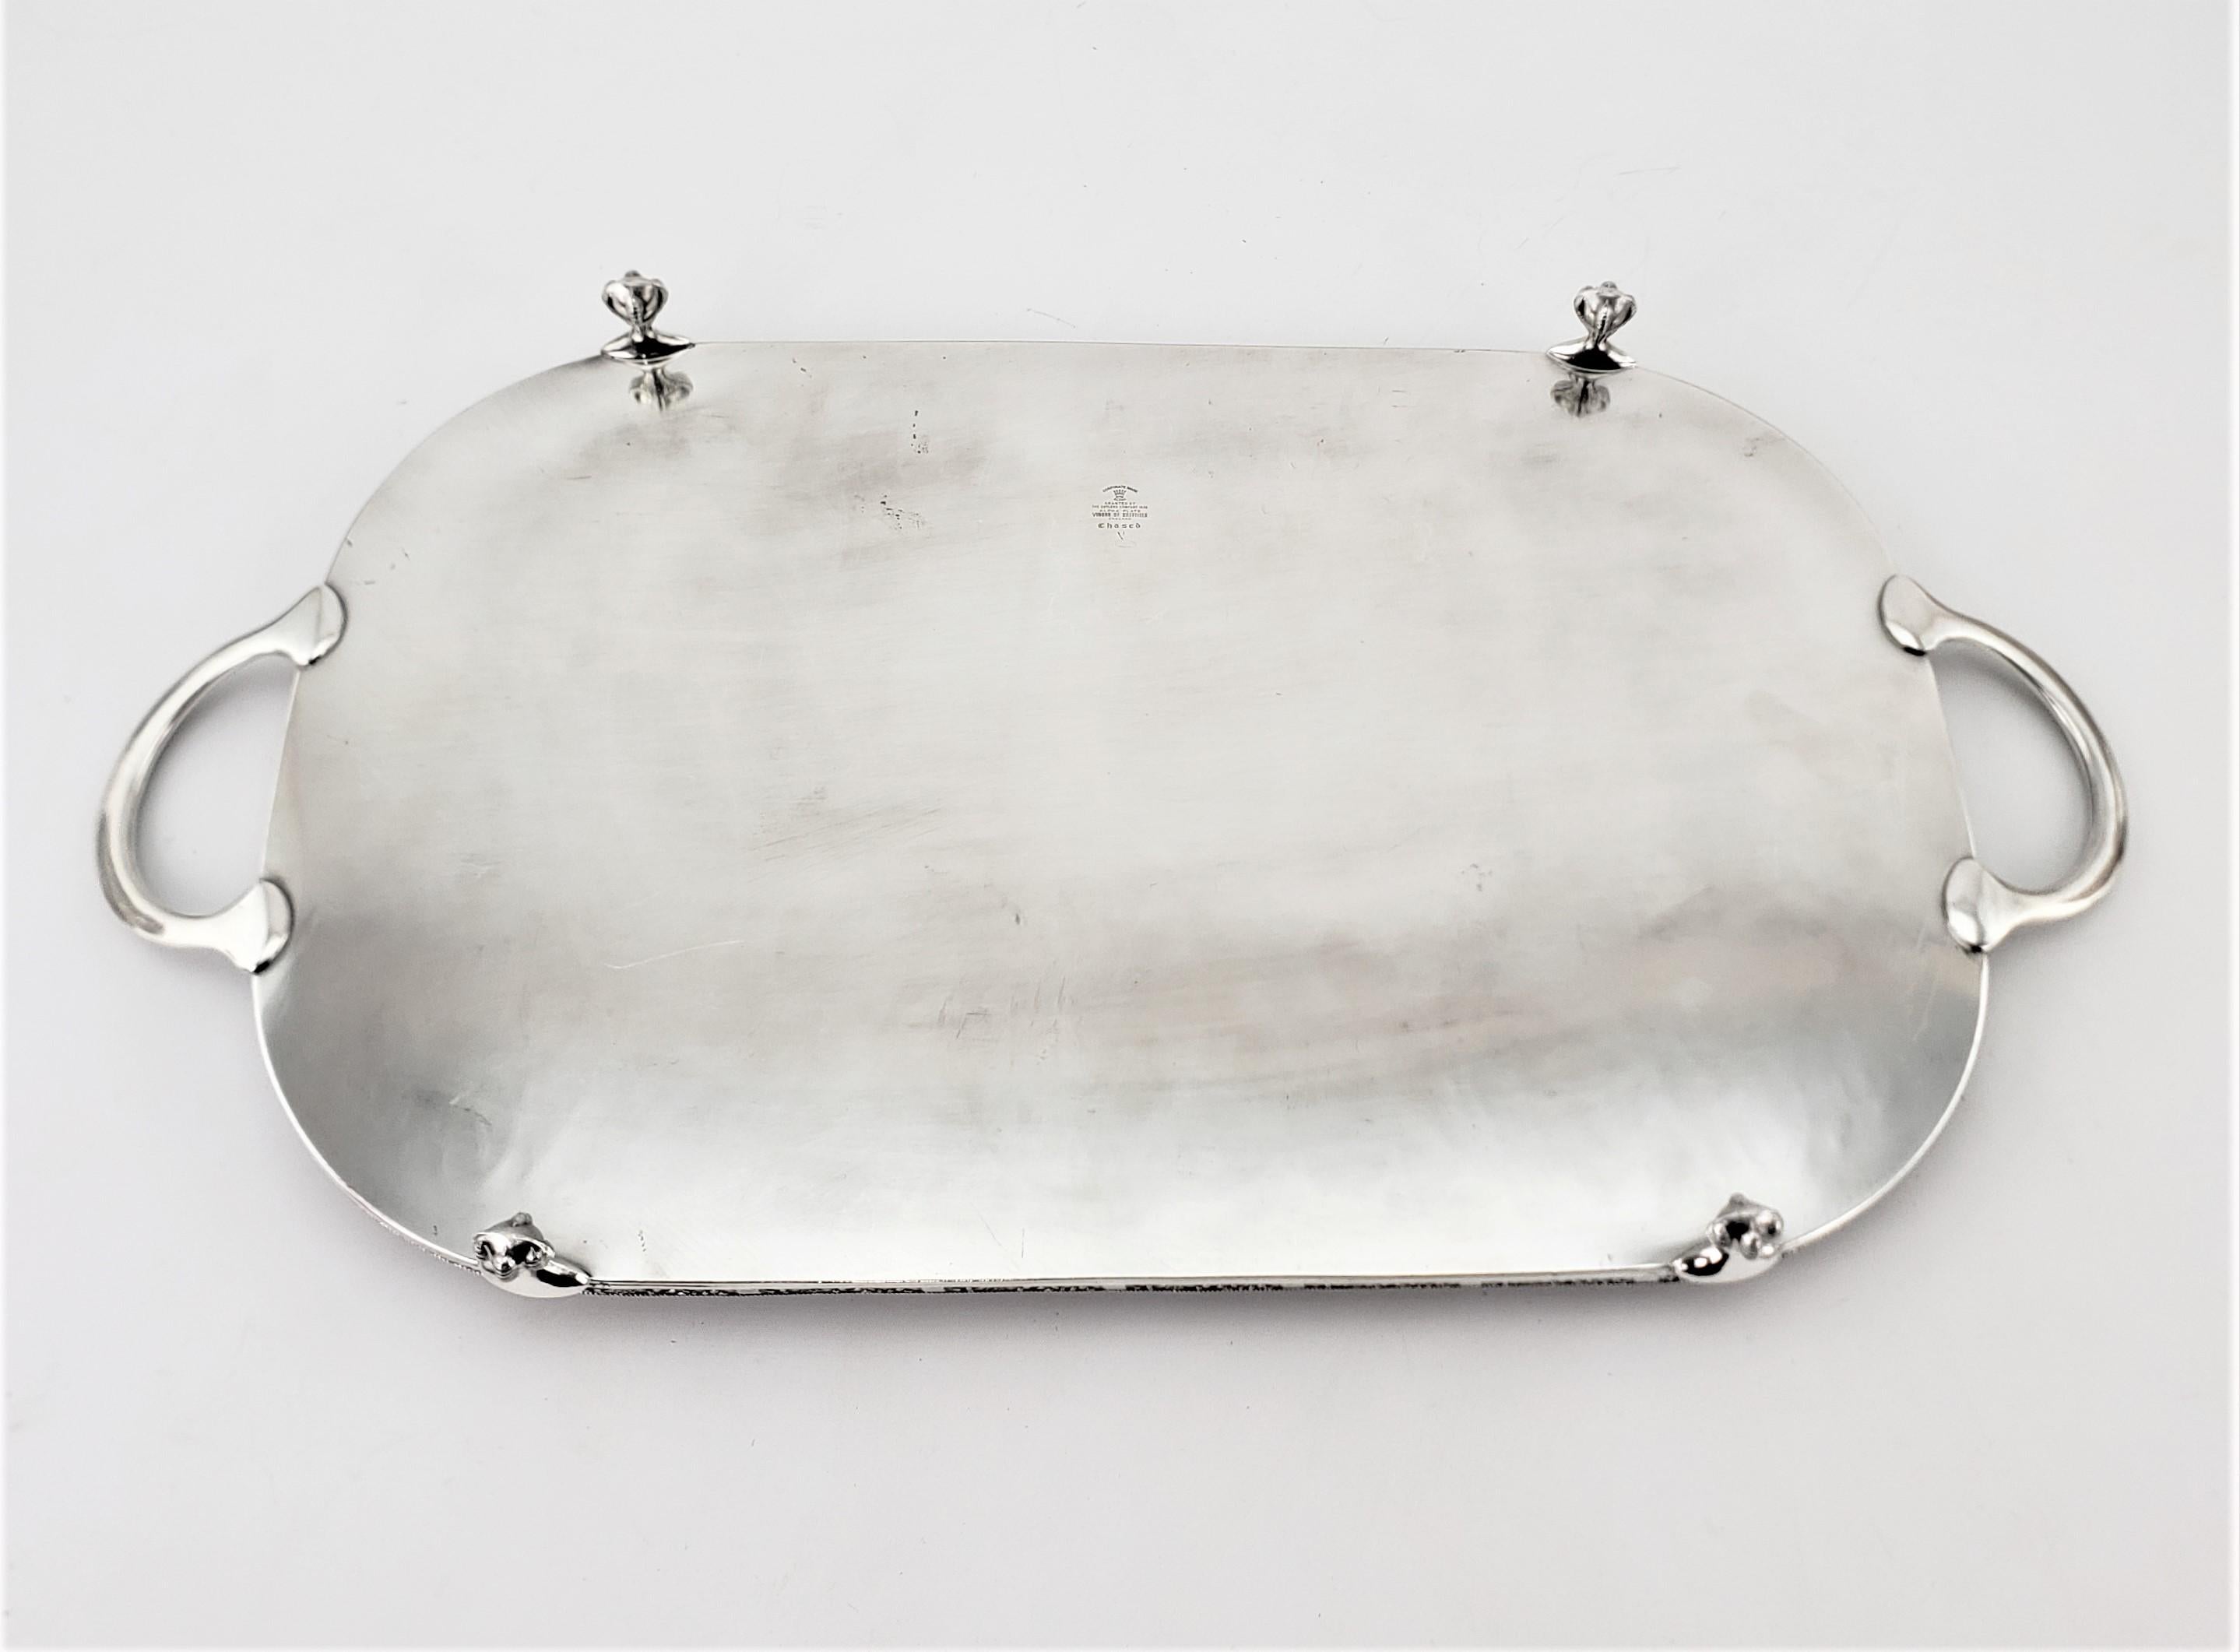 Machine-Made Antique English Footed Silver Plated Gallery Serving Tray with Floral Decoration For Sale